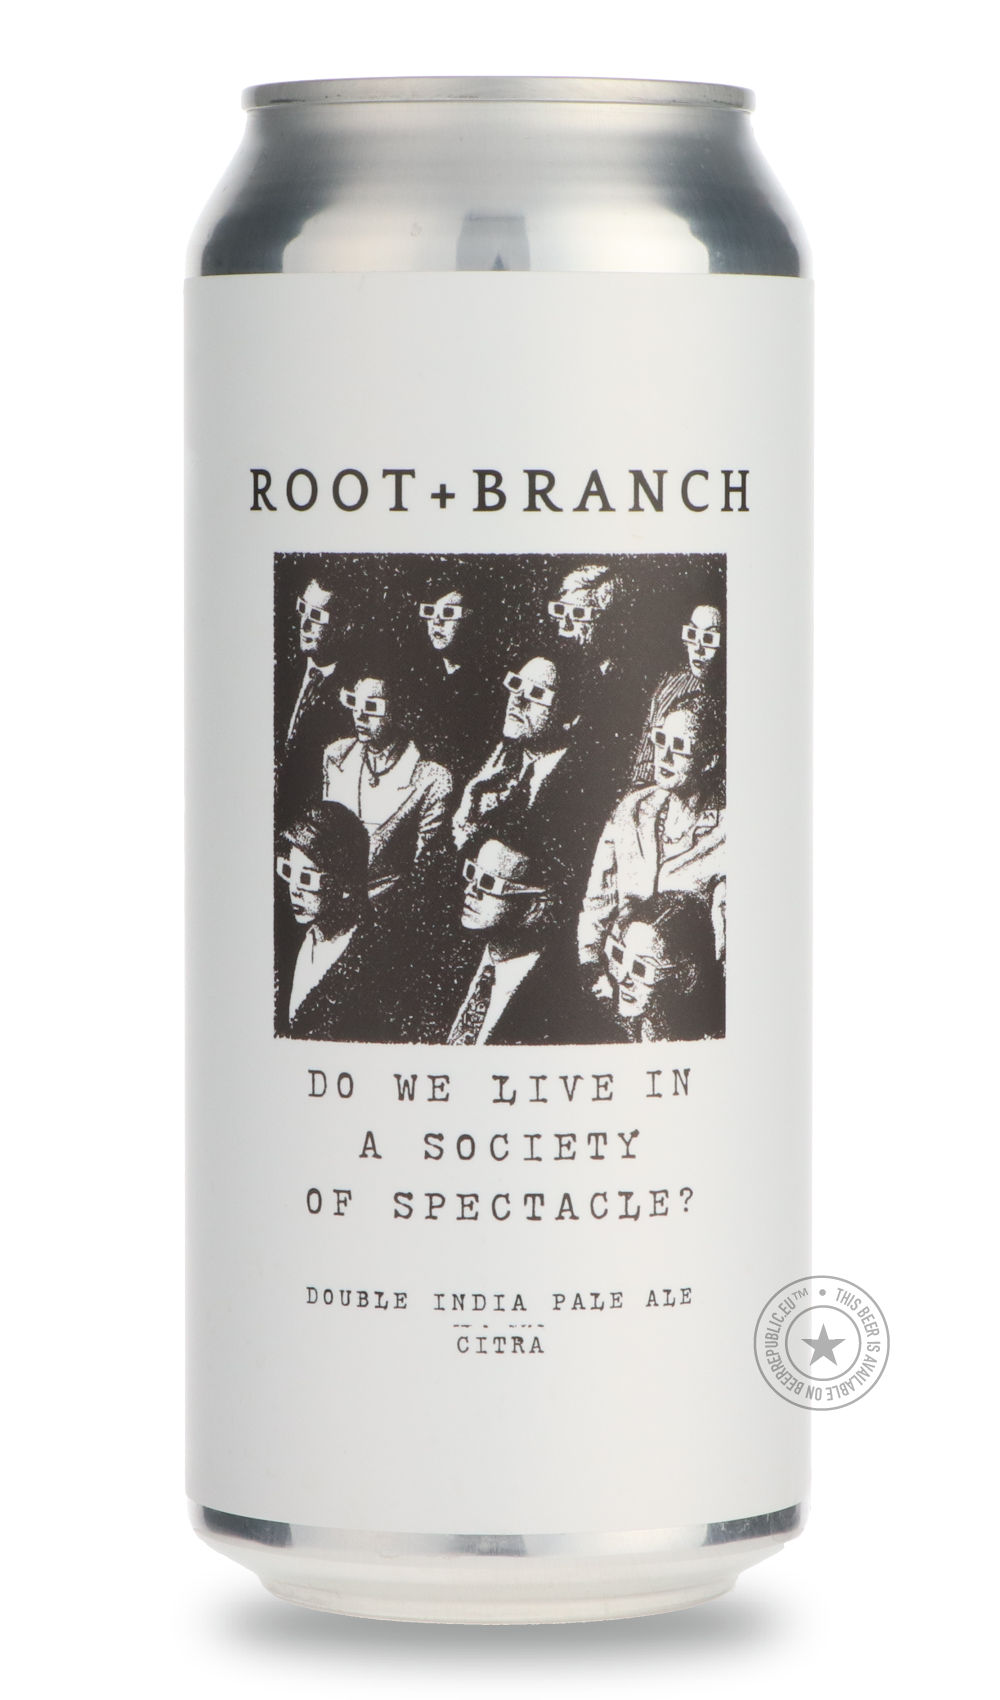 -Root + Branch- Do We Live In A Society of Spectacle? (Citra)-IPA- Only @ Beer Republic - The best online beer store for American & Canadian craft beer - Buy beer online from the USA and Canada - Bier online kopen - Amerikaans bier kopen - Craft beer store - Craft beer kopen - Amerikanisch bier kaufen - Bier online kaufen - Acheter biere online - IPA - Stout - Porter - New England IPA - Hazy IPA - Imperial Stout - Barrel Aged - Barrel Aged Imperial Stout - Brown - Dark beer - Blond - Blonde - Pilsner - Lage